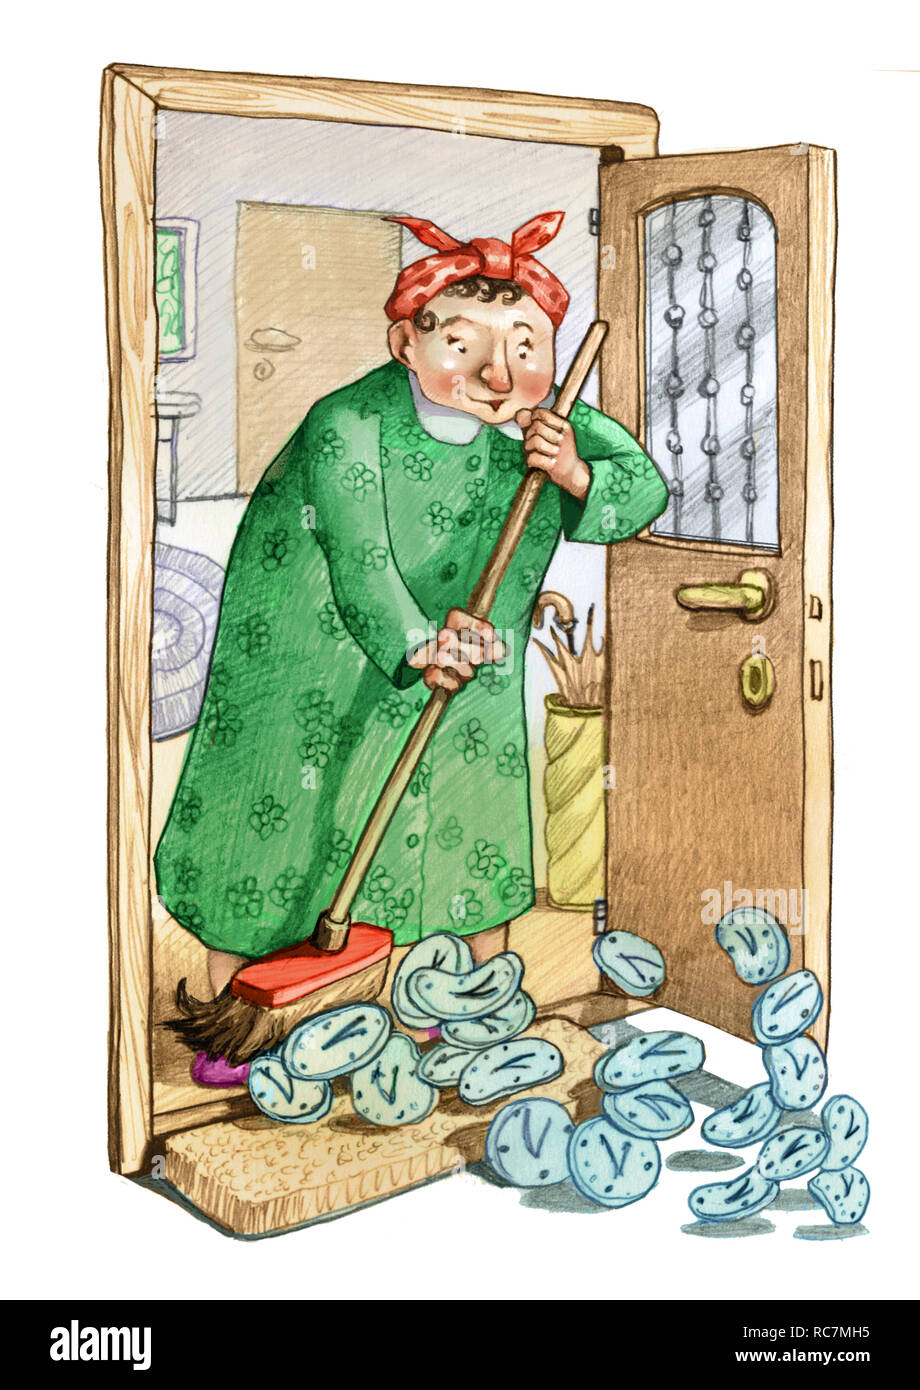 housewife cleans house sweeping out some clocks metaphor of the lost time that doesn't return pencil draw humor illustration Stock Photo